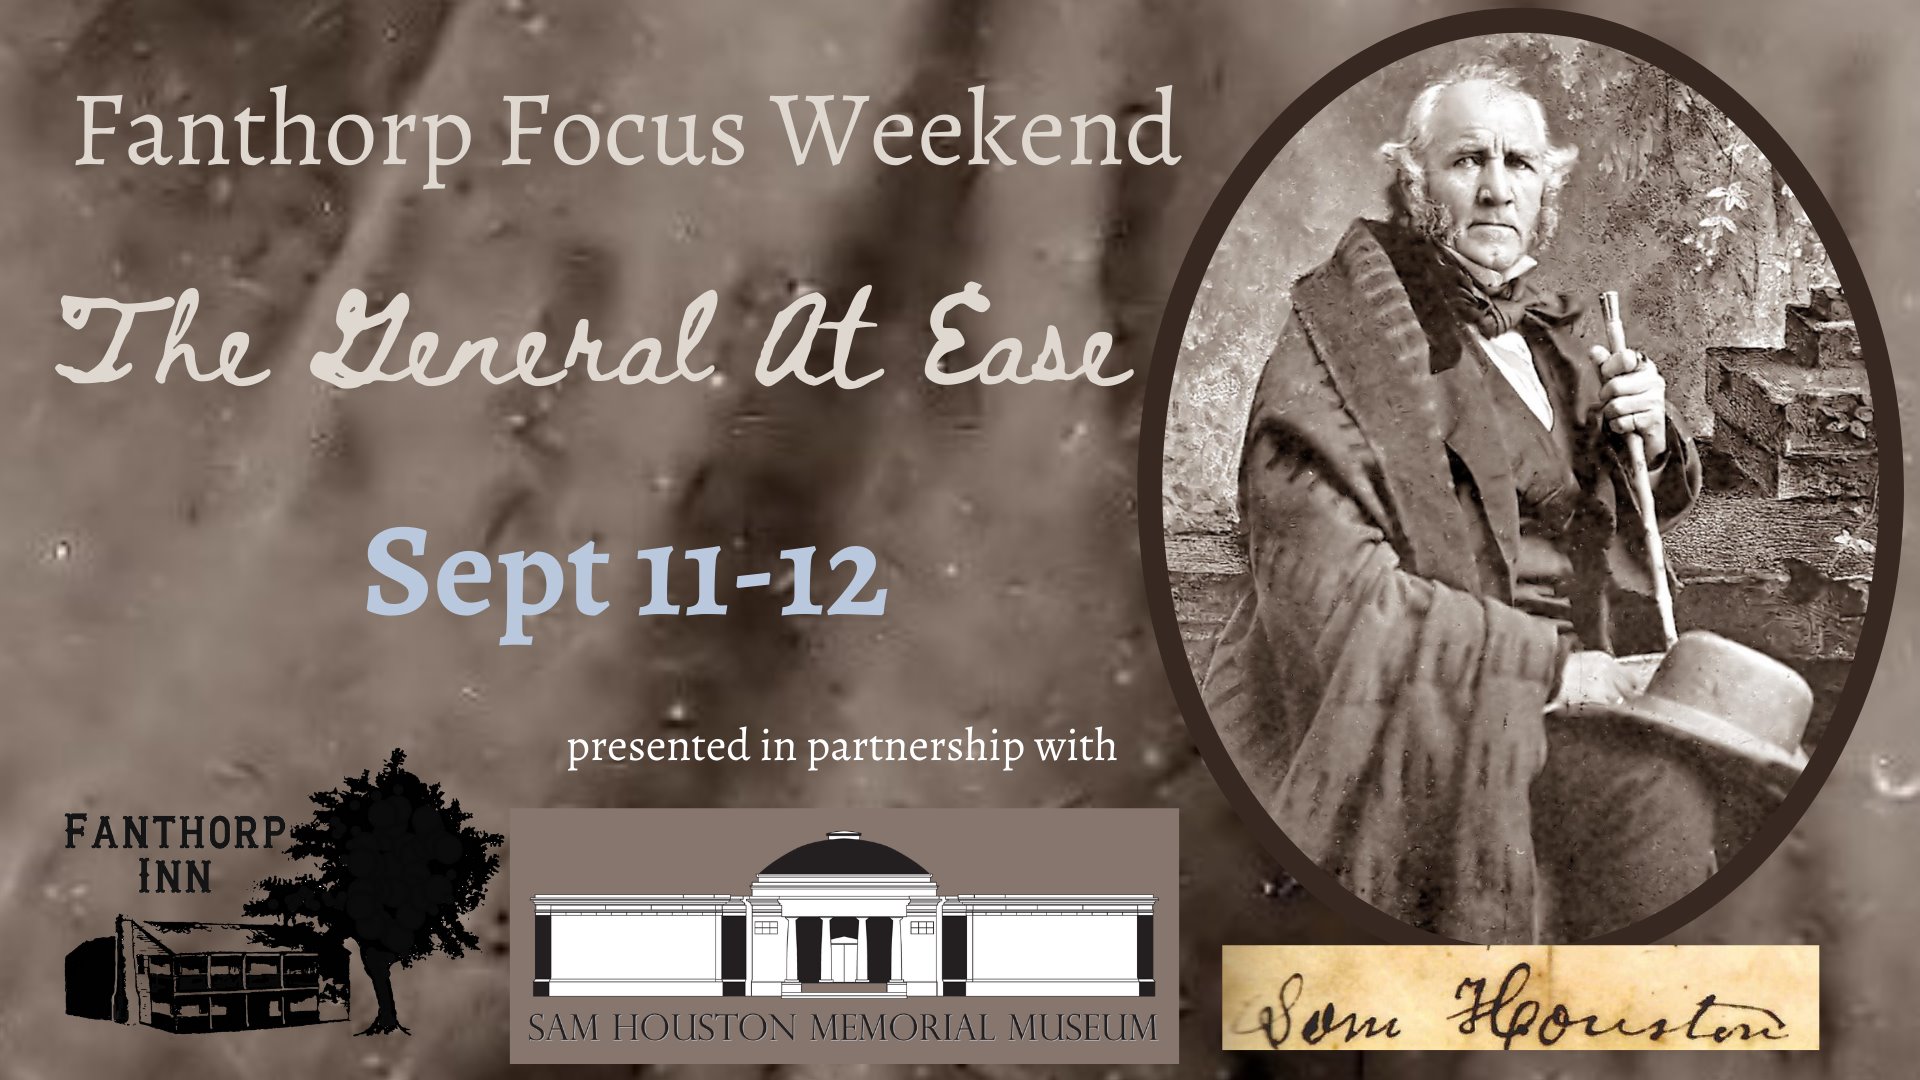 Fanthorp Focus Weekend: The General At Ease